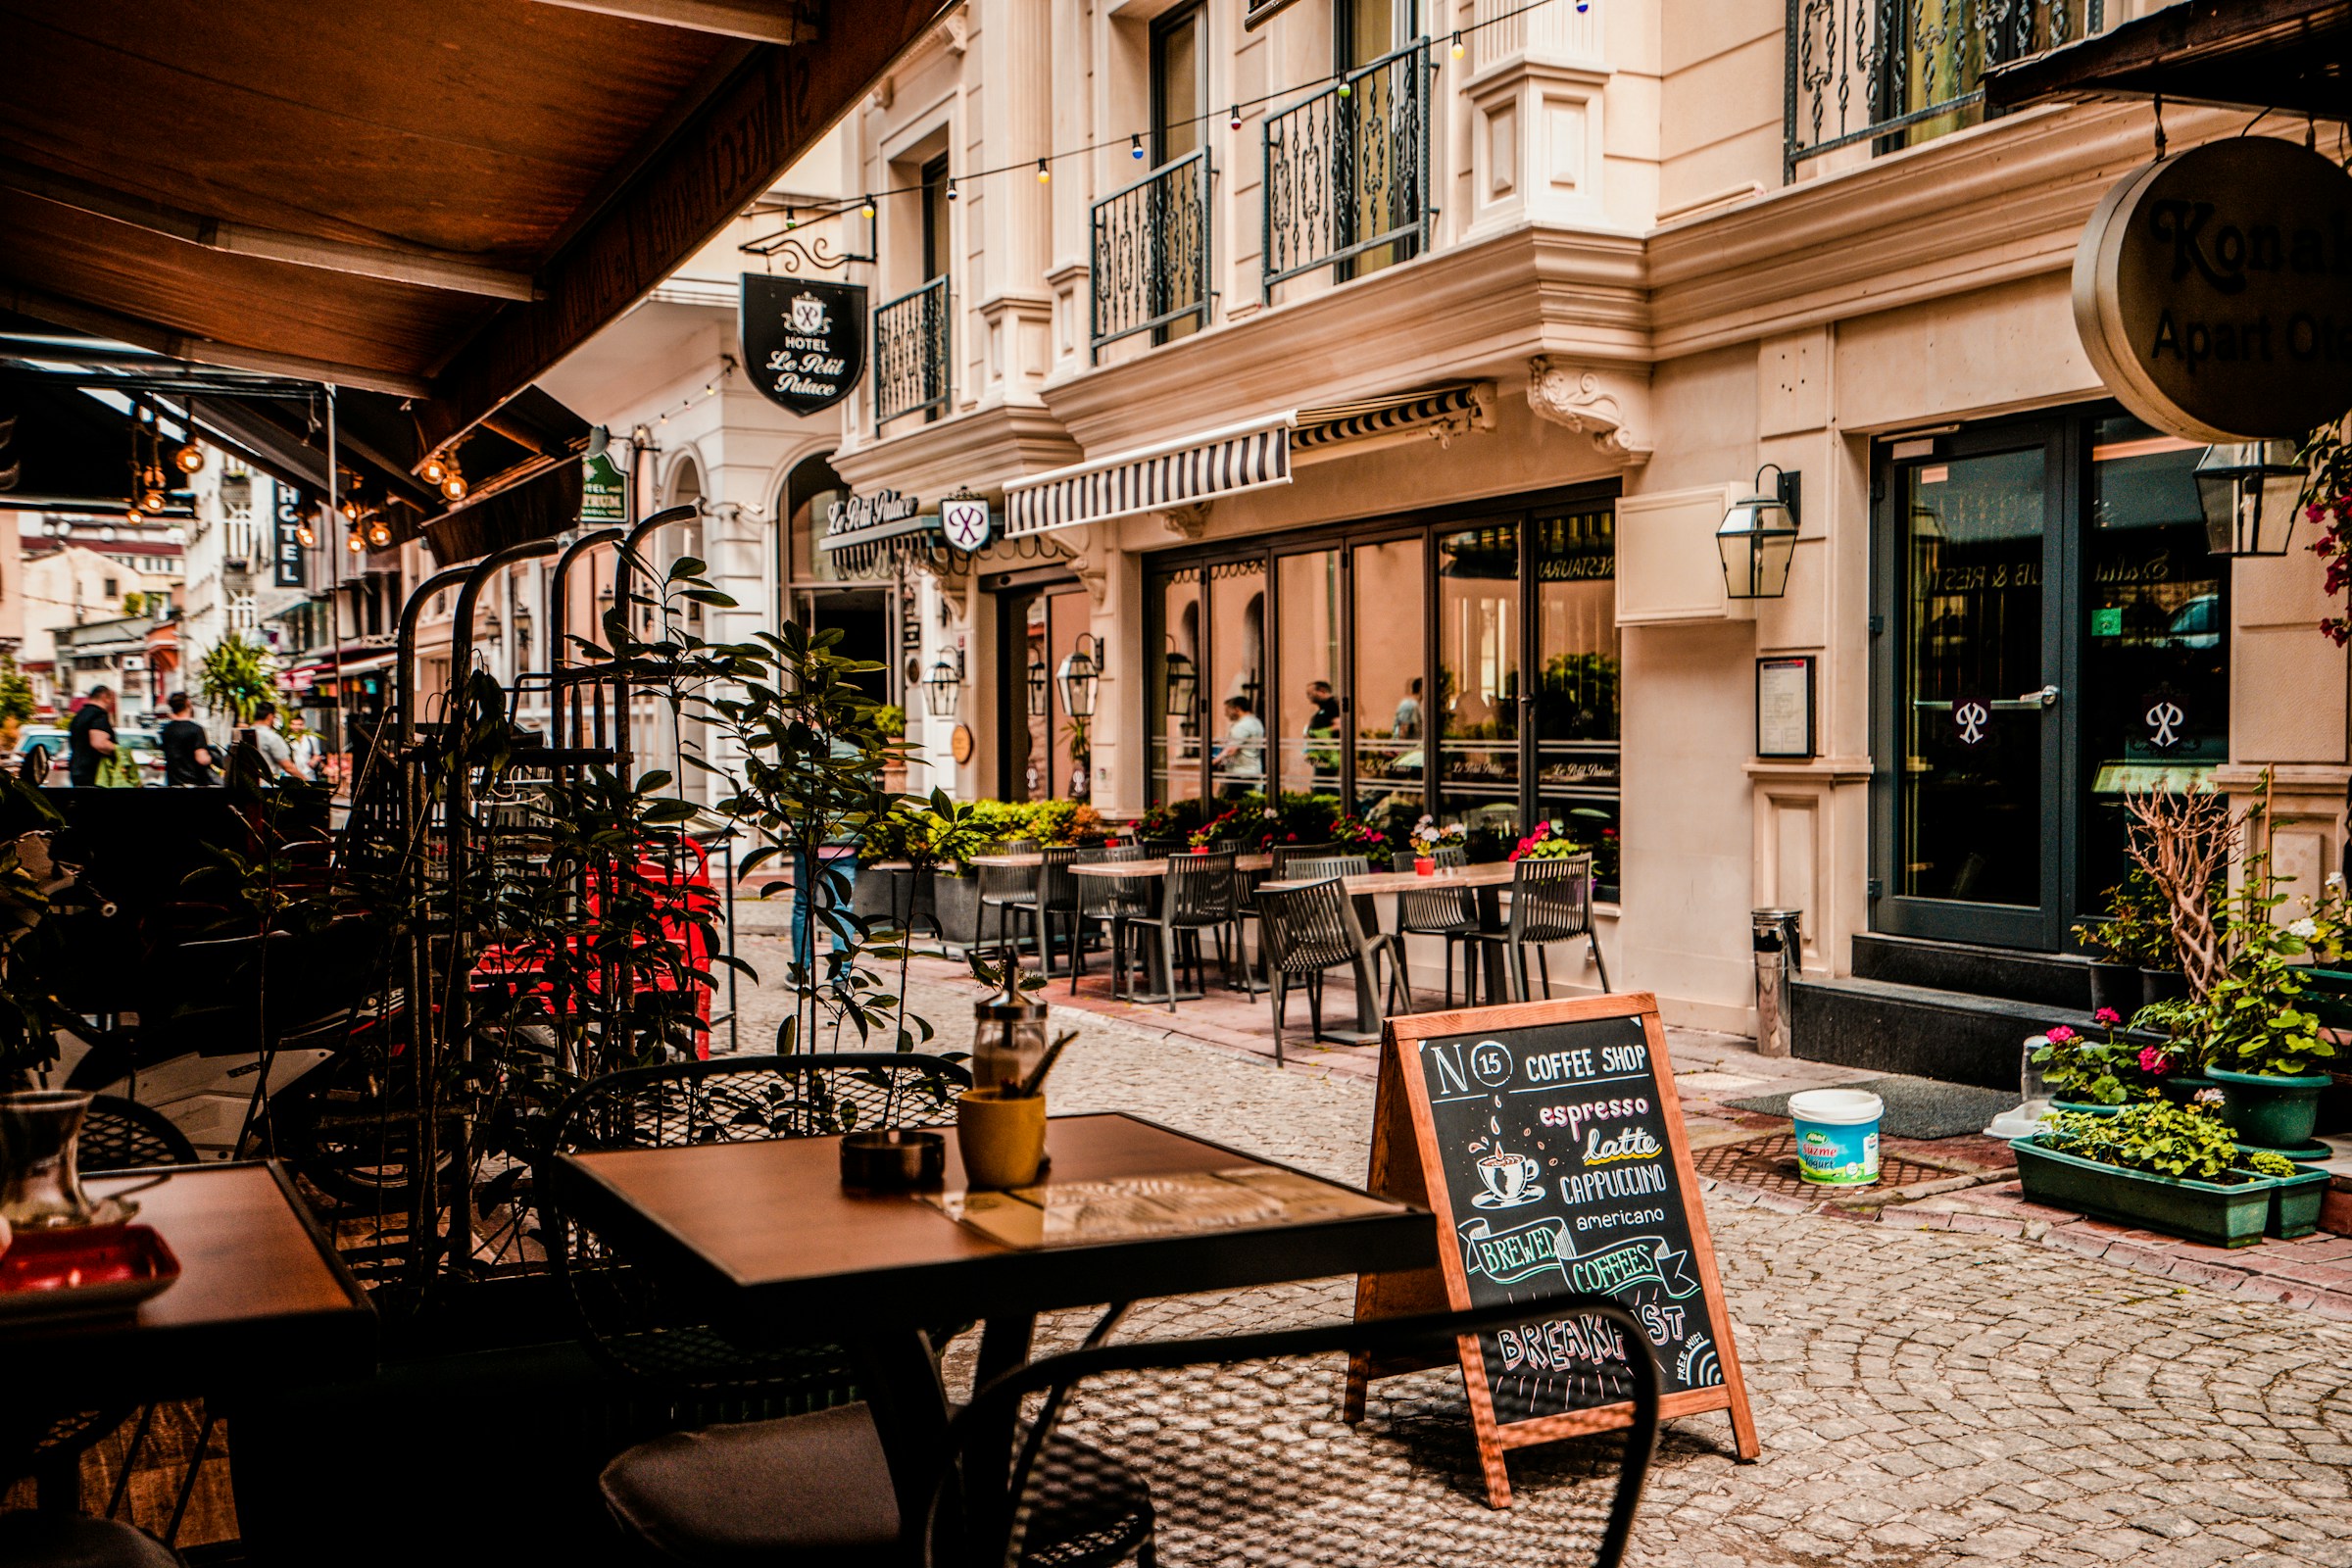 The exterior of a cafe | Source: Unsplash